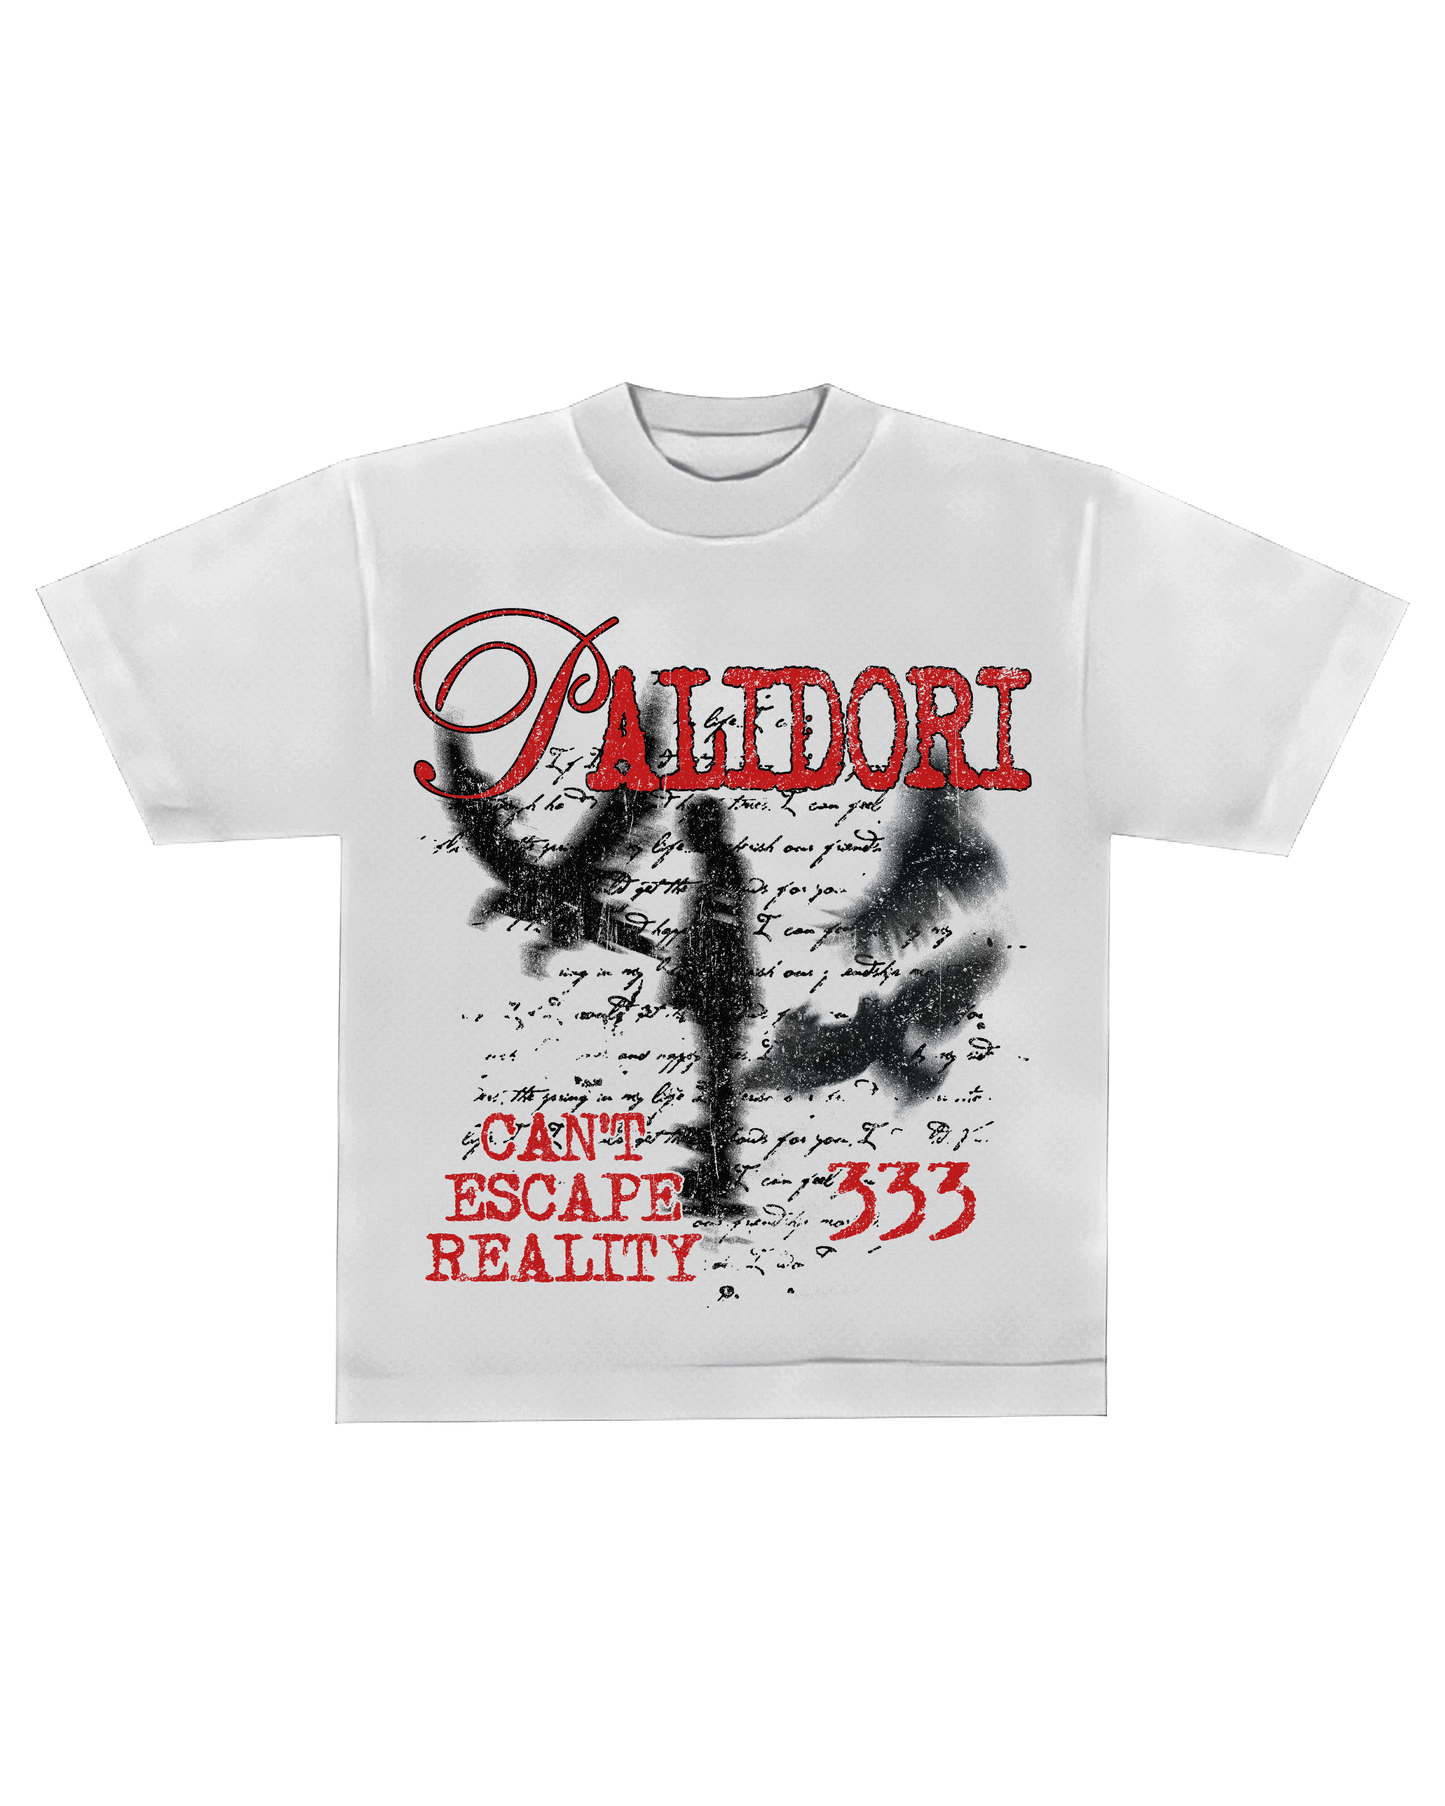 Can’t Escape Reality T-Shirt